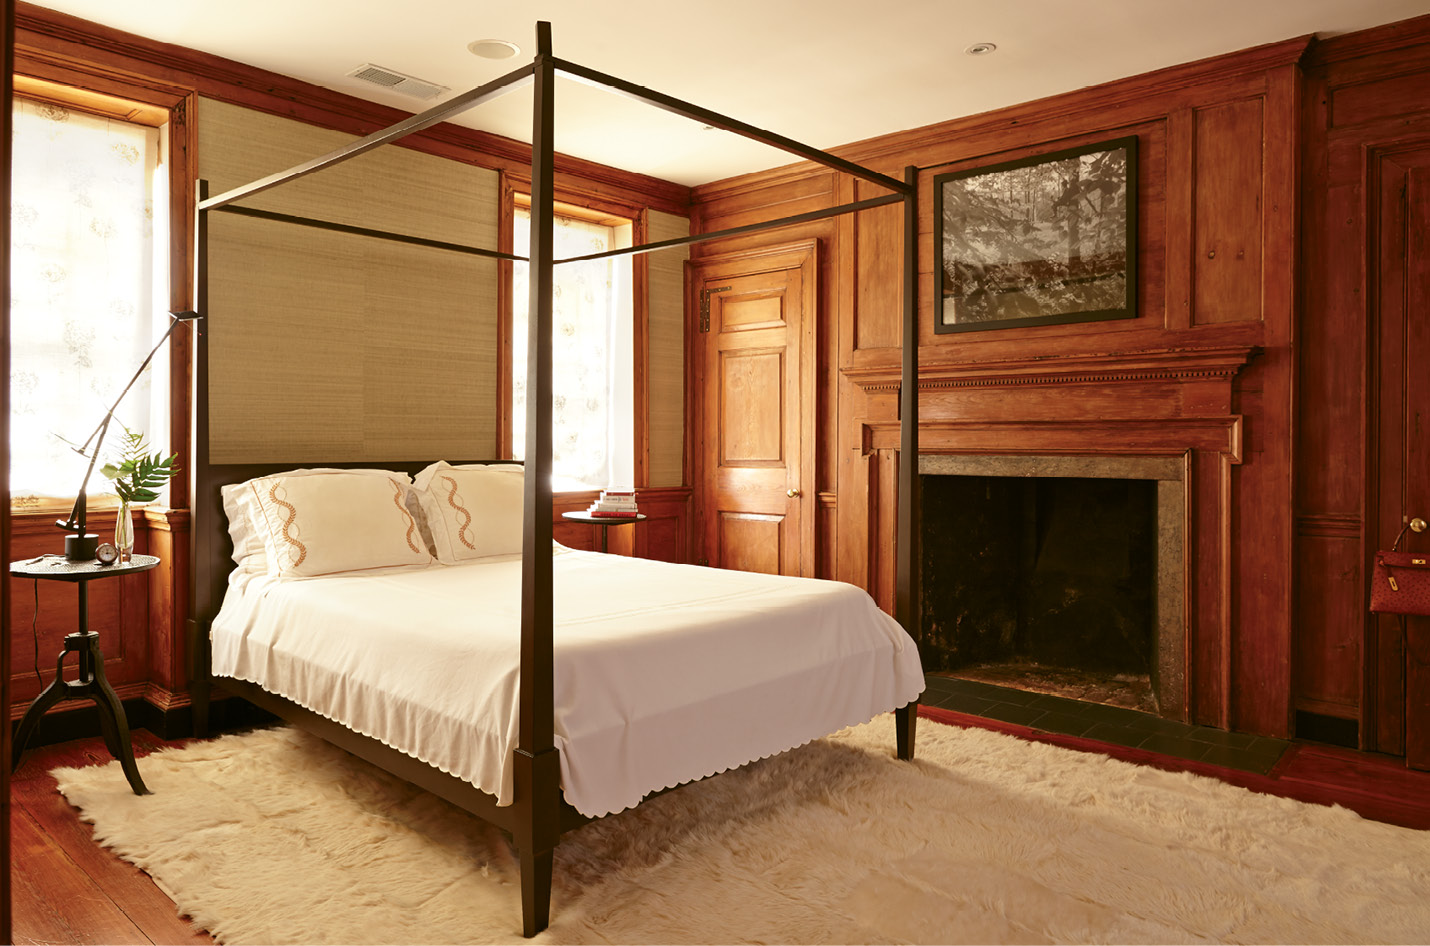 Original cypress paneling lends a dignified air to the master bedroom.